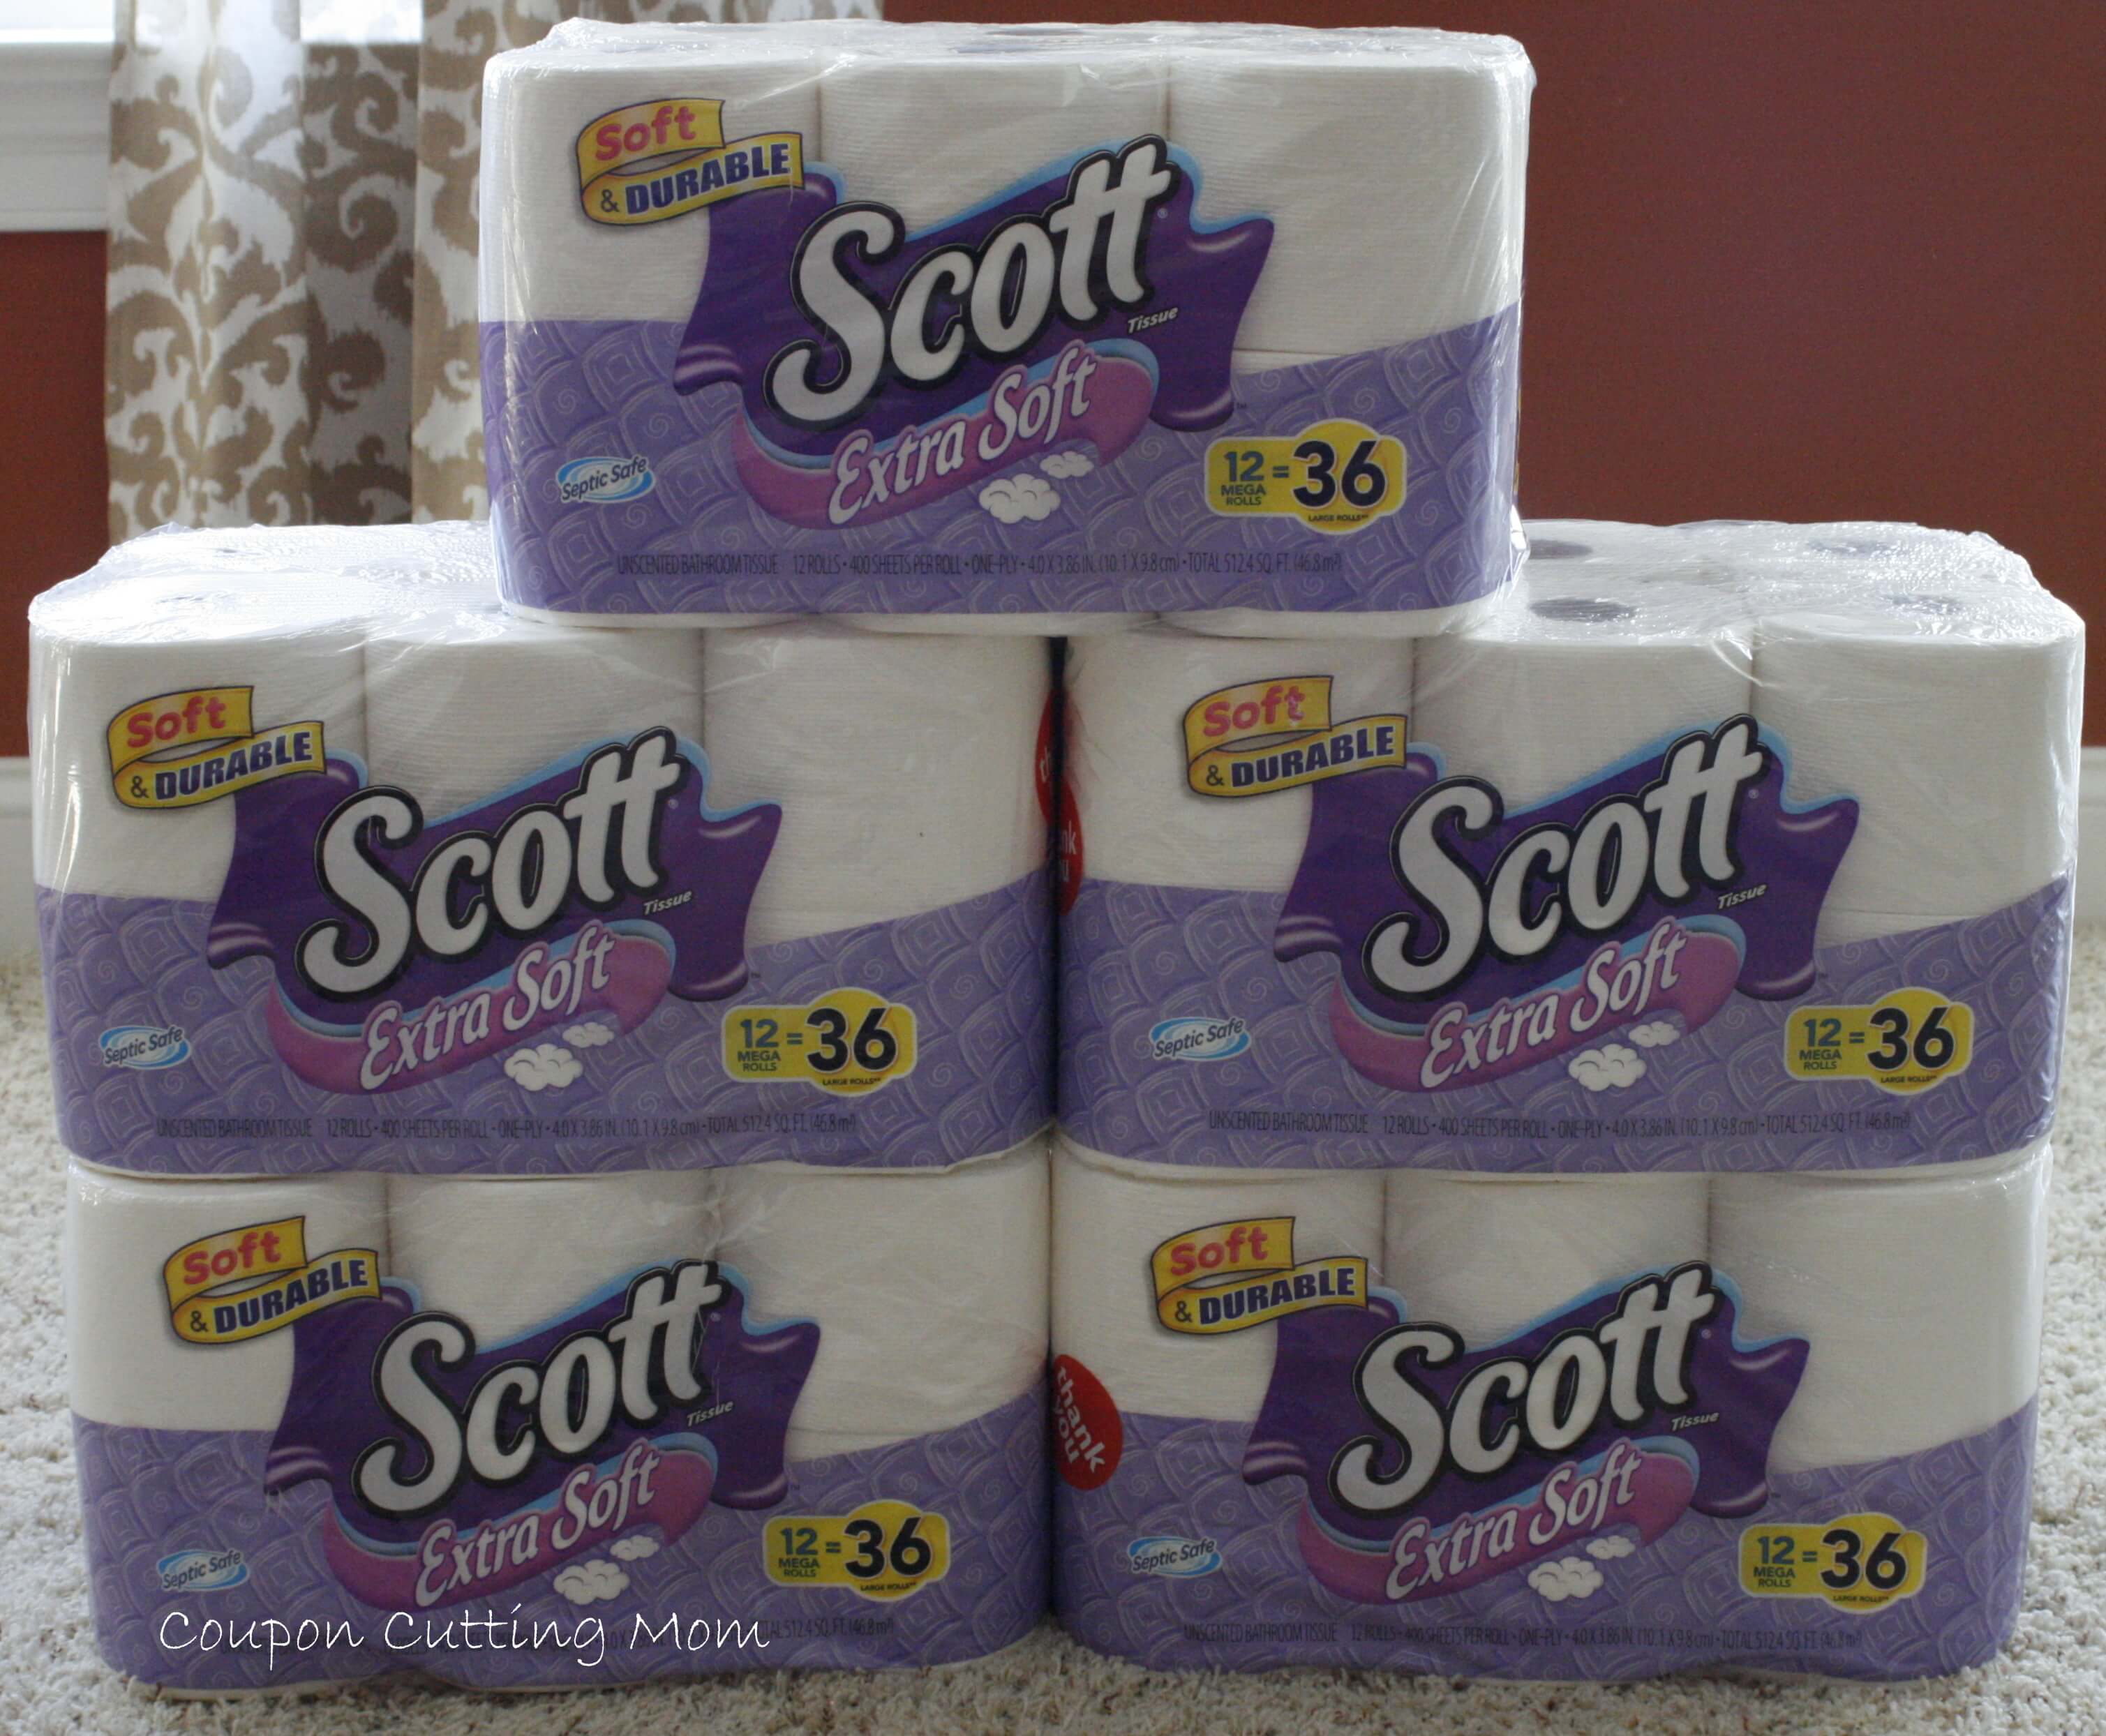 Giant: Stock Up Price On Cottonelle and Scott Bath Tissue 